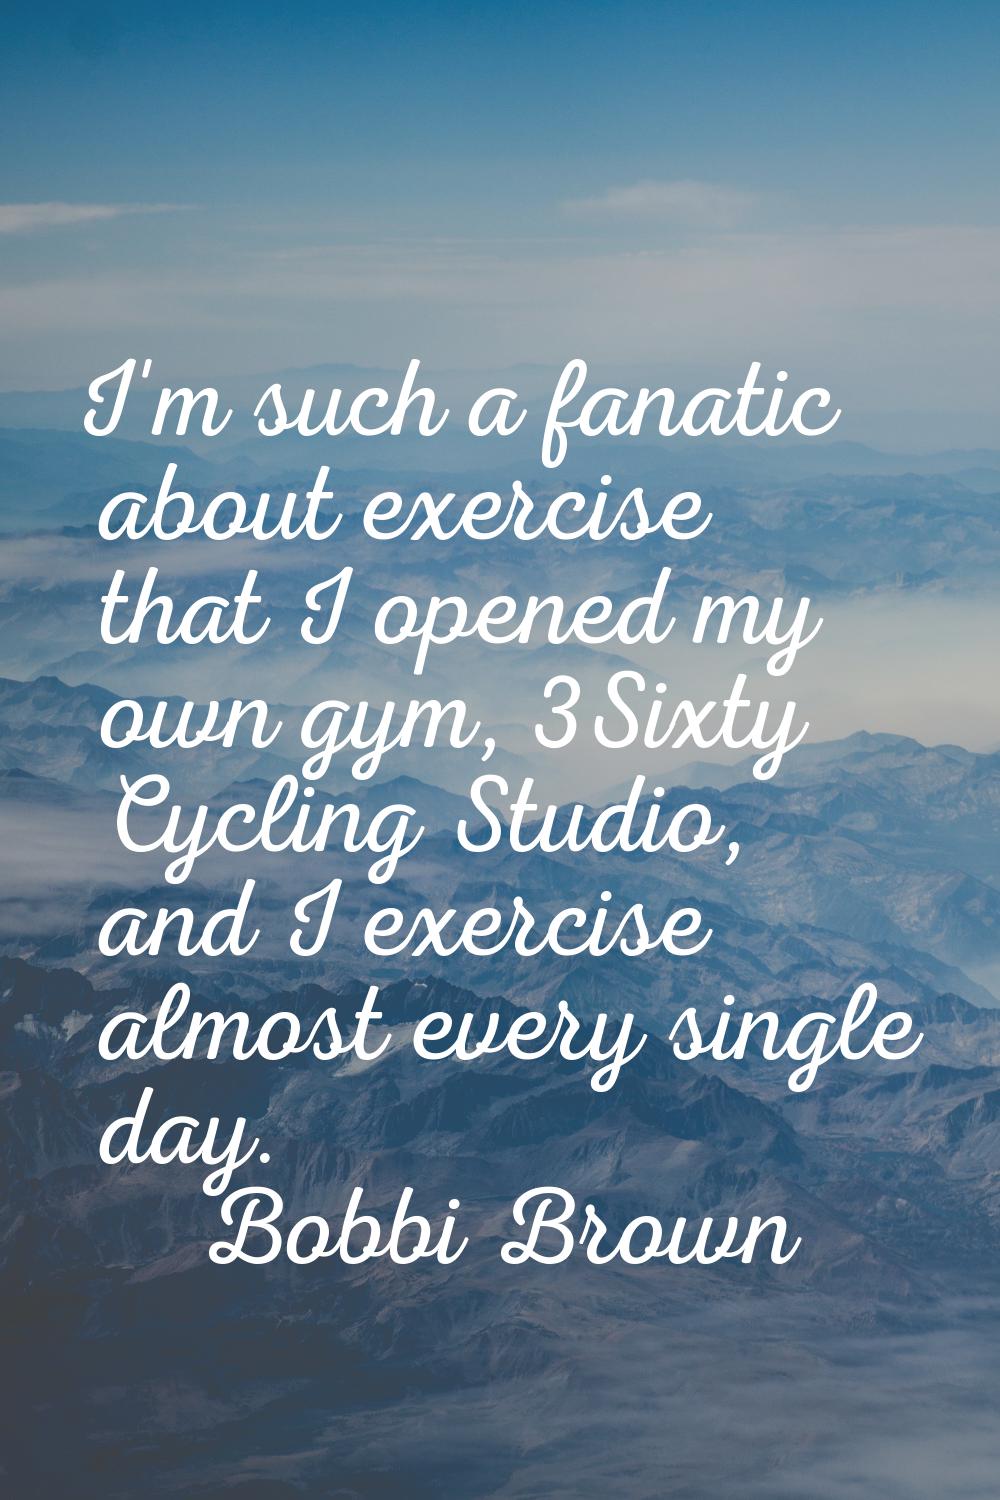 I'm such a fanatic about exercise that I opened my own gym, 3Sixty Cycling Studio, and I exercise a